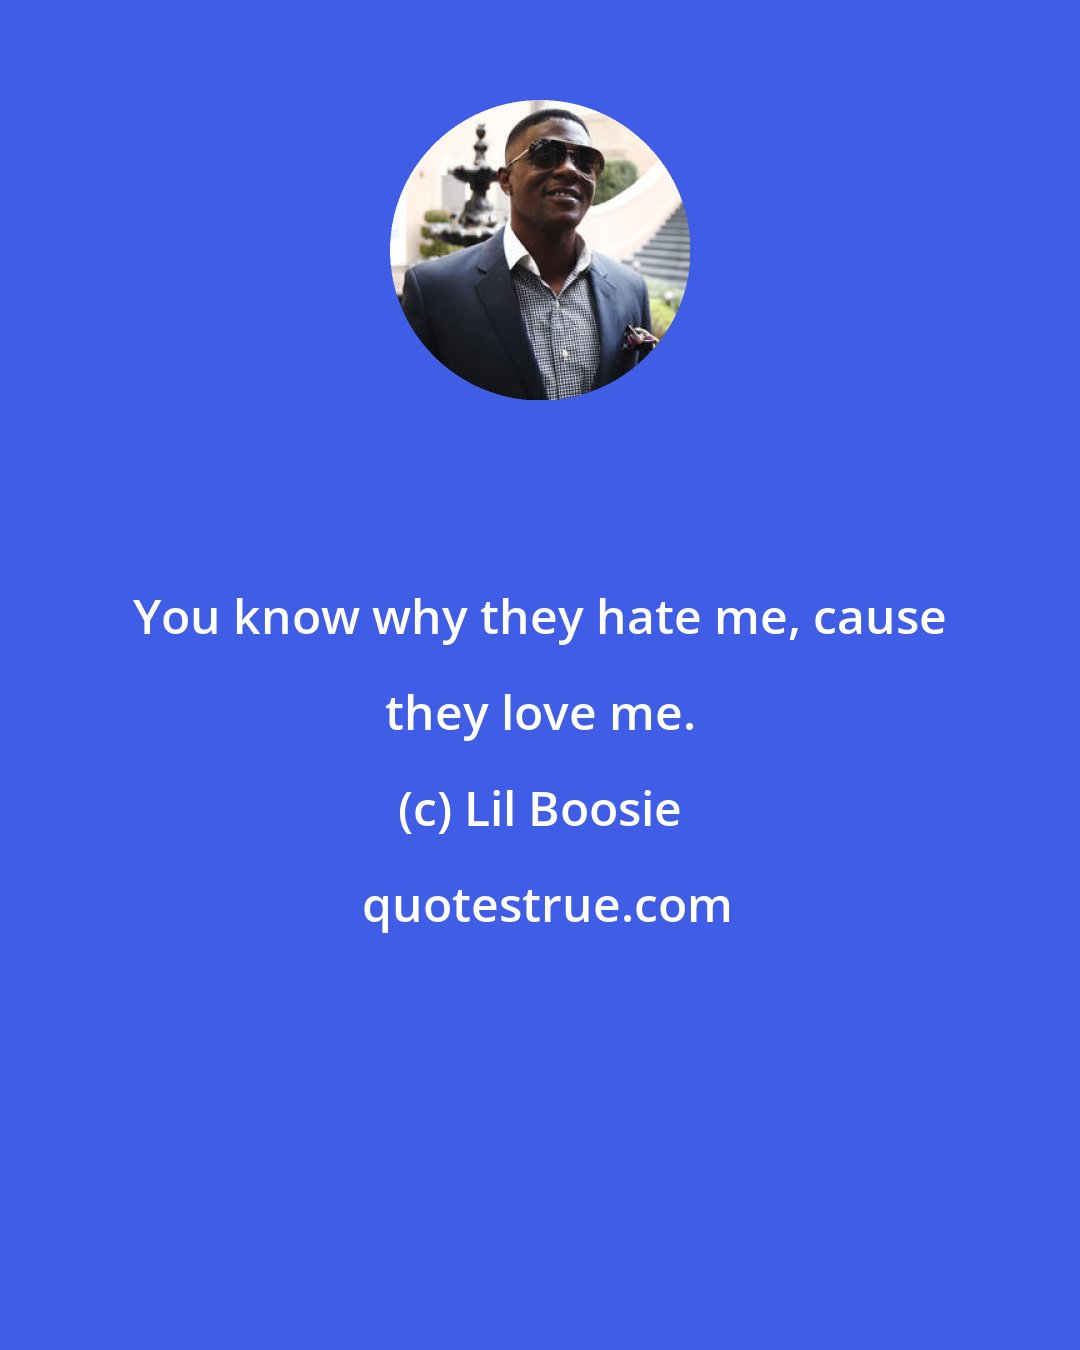 Lil Boosie: You know why they hate me, cause they love me.